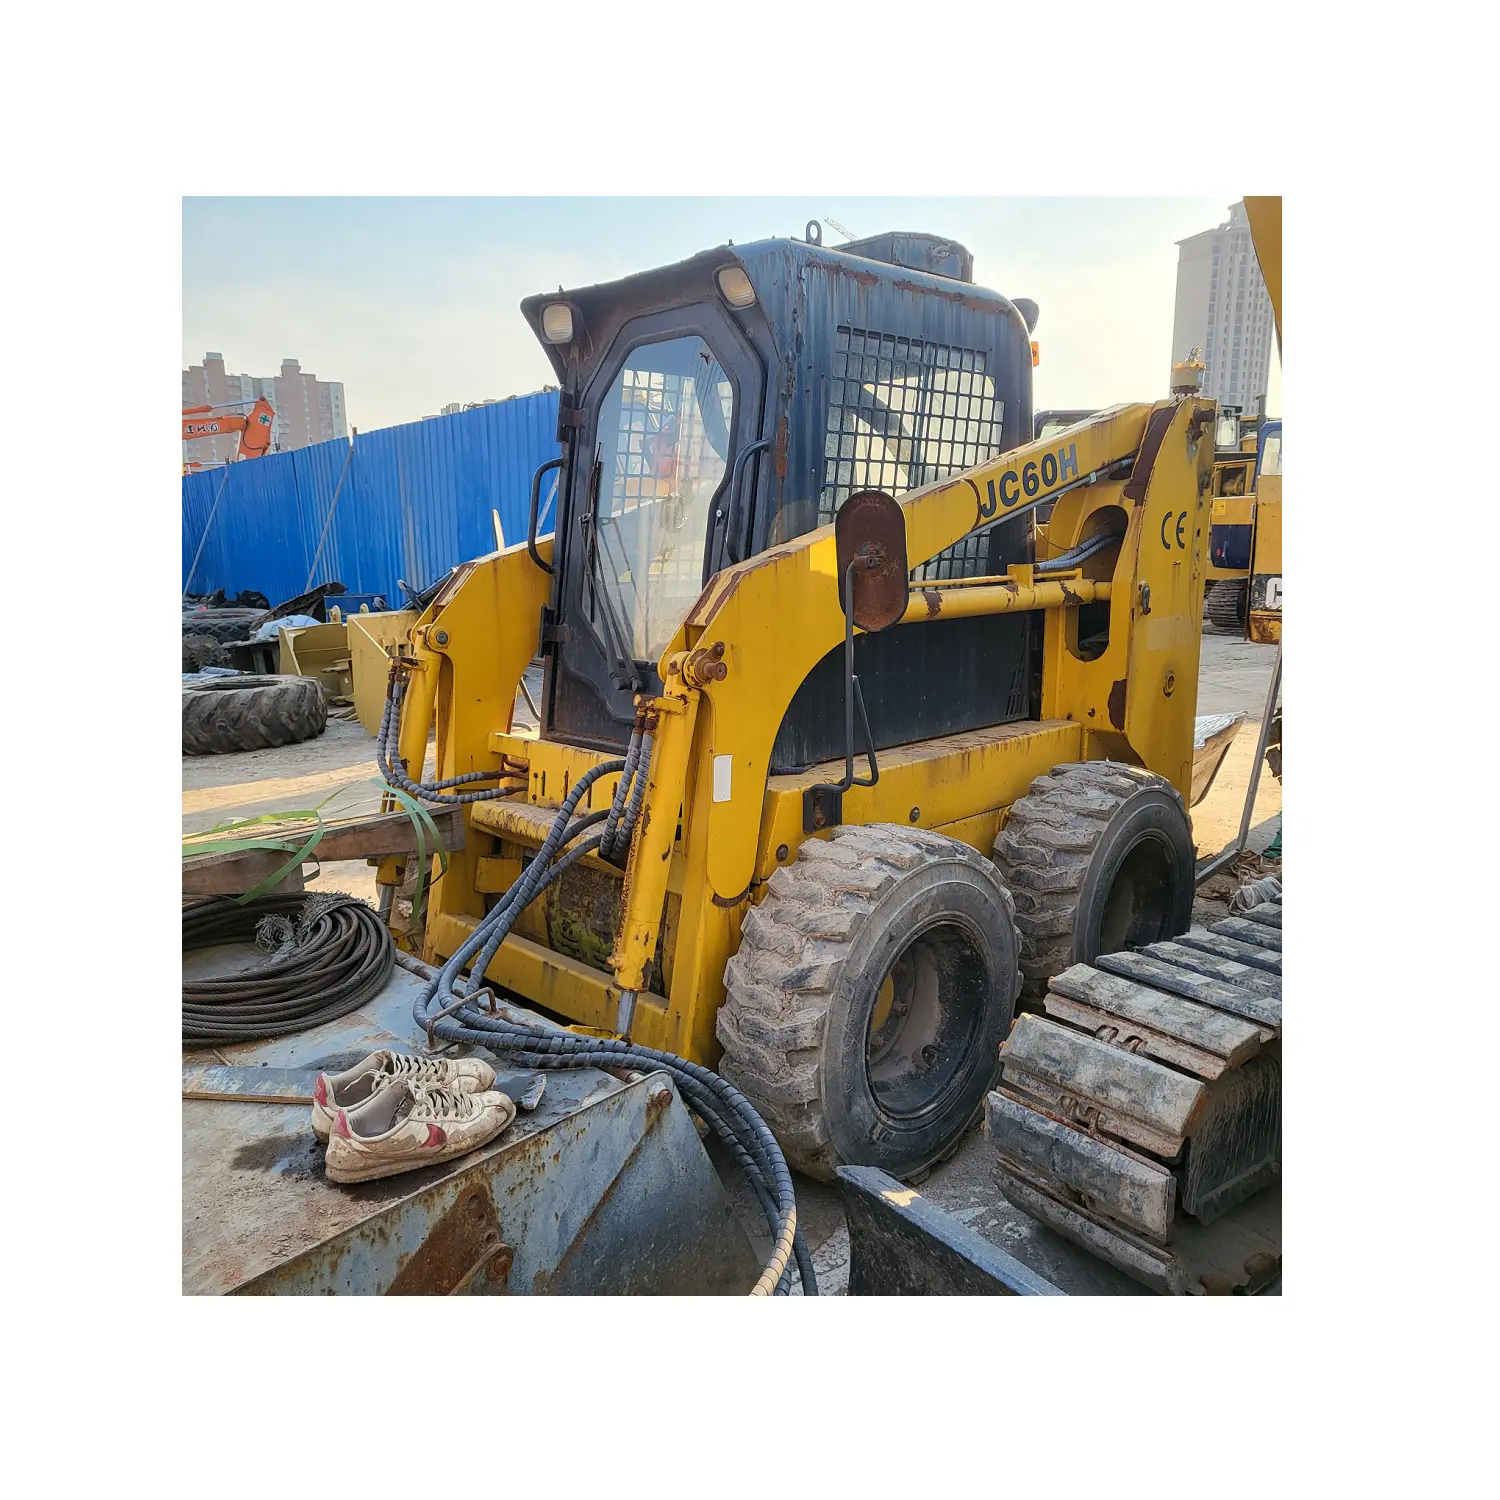 Good quality Chinese Used JC60H skid steer loader,engine power 60hp,loading capacity 850kg